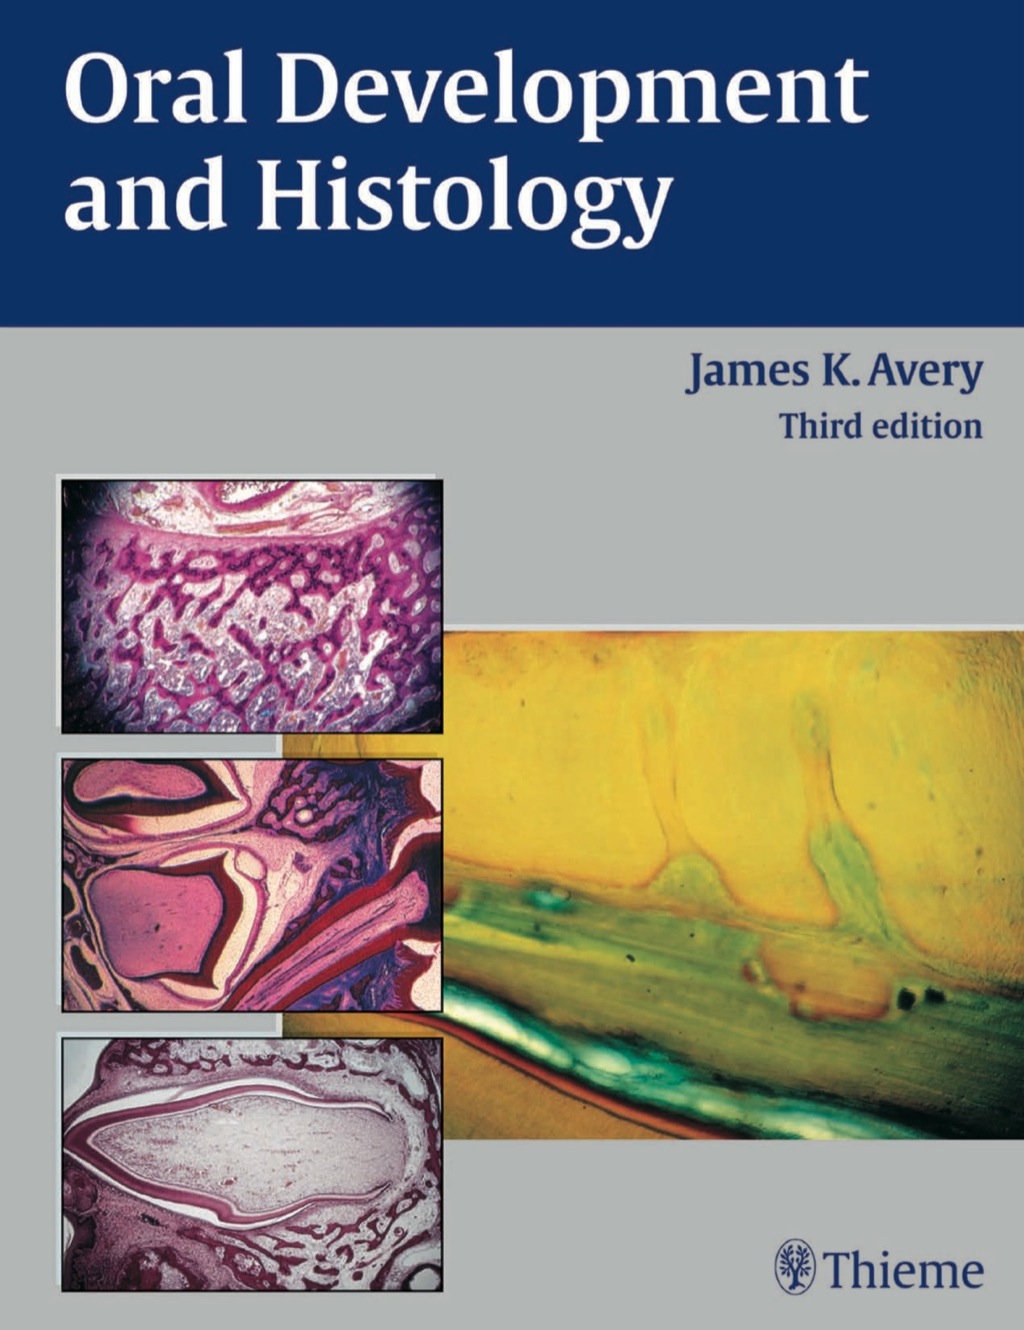 Oral Development and Histology - 3rd Edition (eBook)